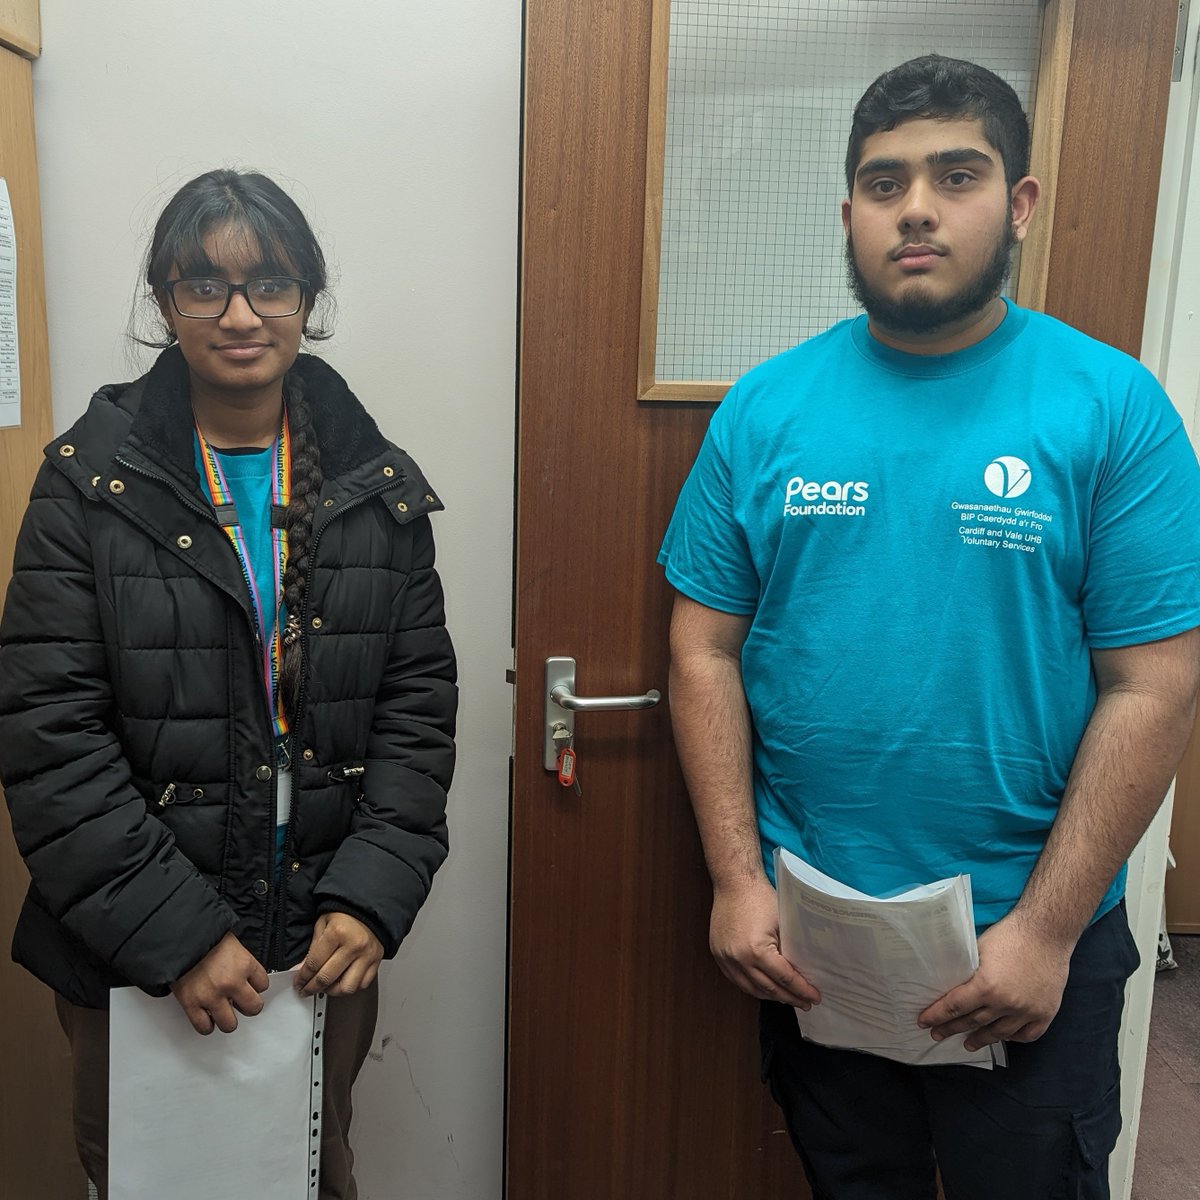 Meet our Volunteers... Rosemaria and Abdullah visit inpatients at Lakeside IACU in UHW weekly, bringing a smile to their faces by providing support and encouragement!